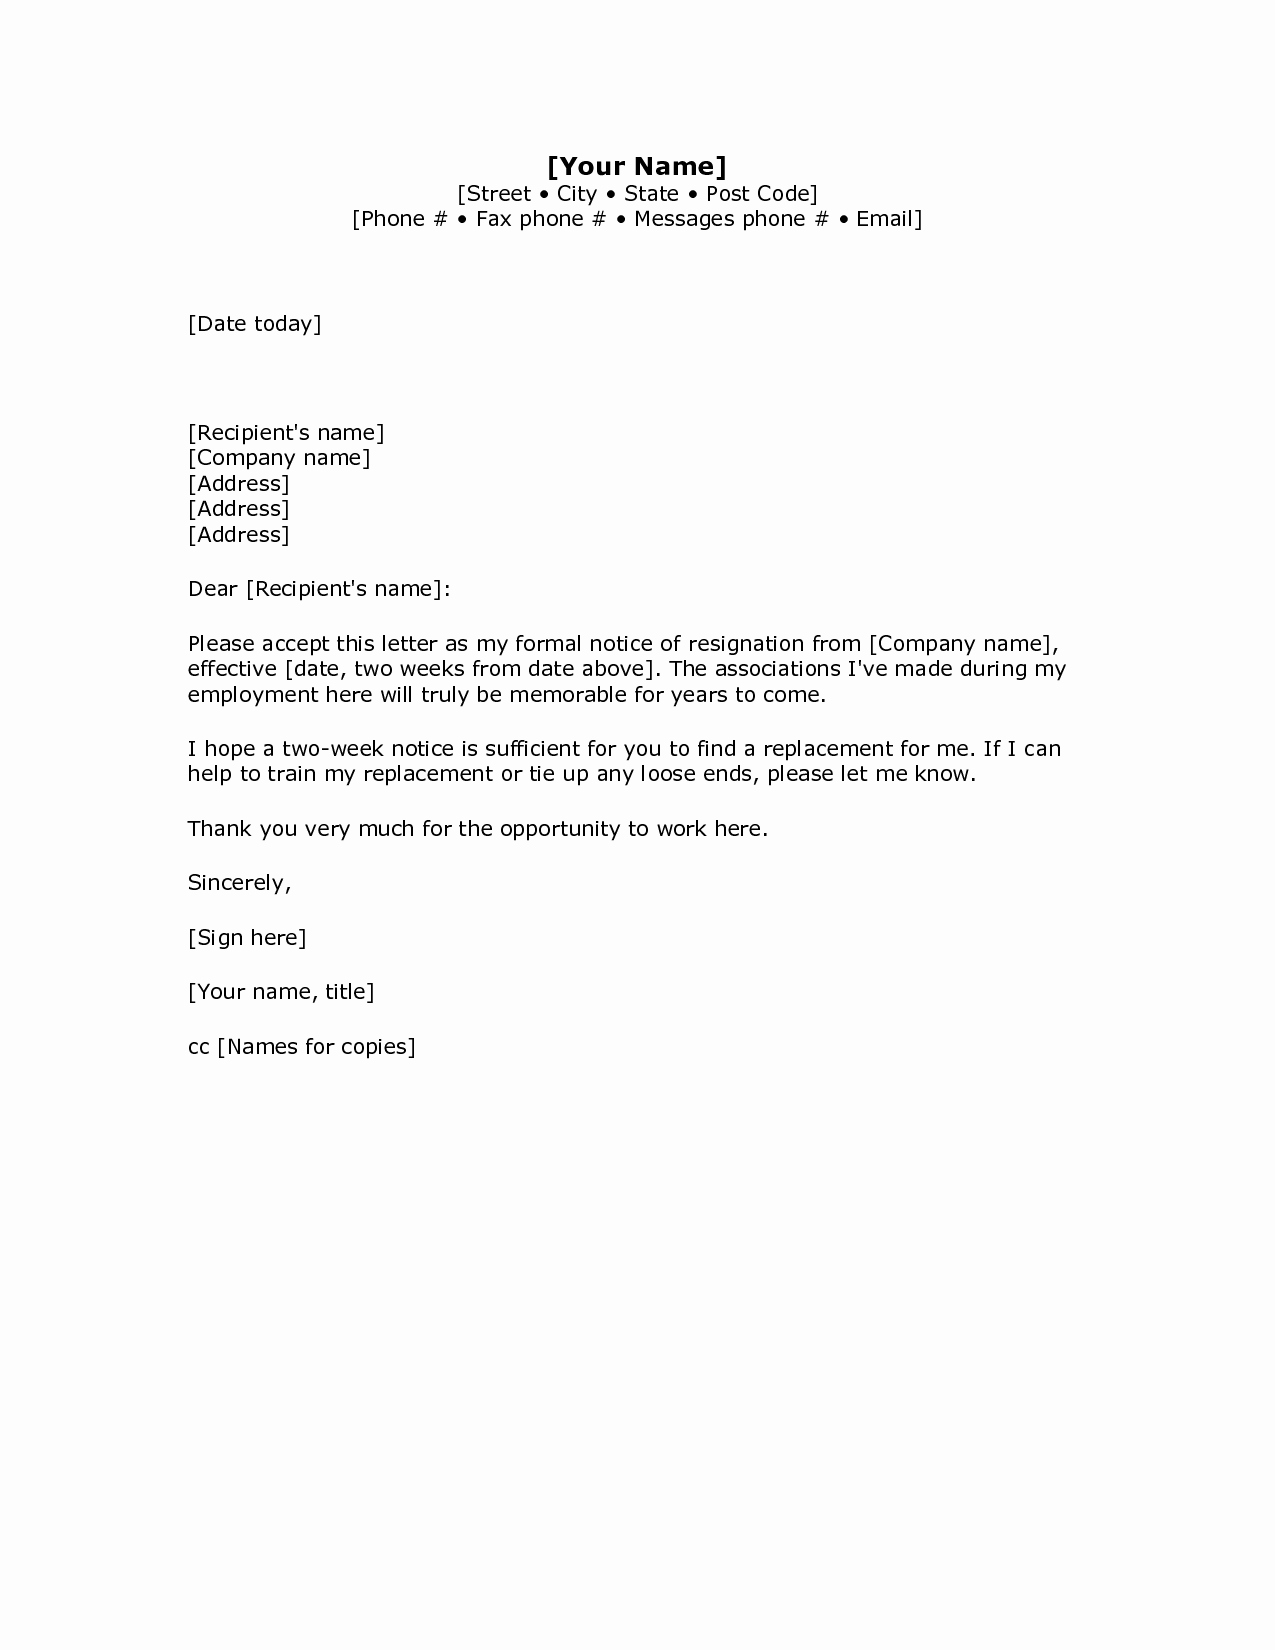 Resignation Letter 2 Week Notice Inspirational Two Weeks Notice Letter How to Write Guide &amp; Resignation